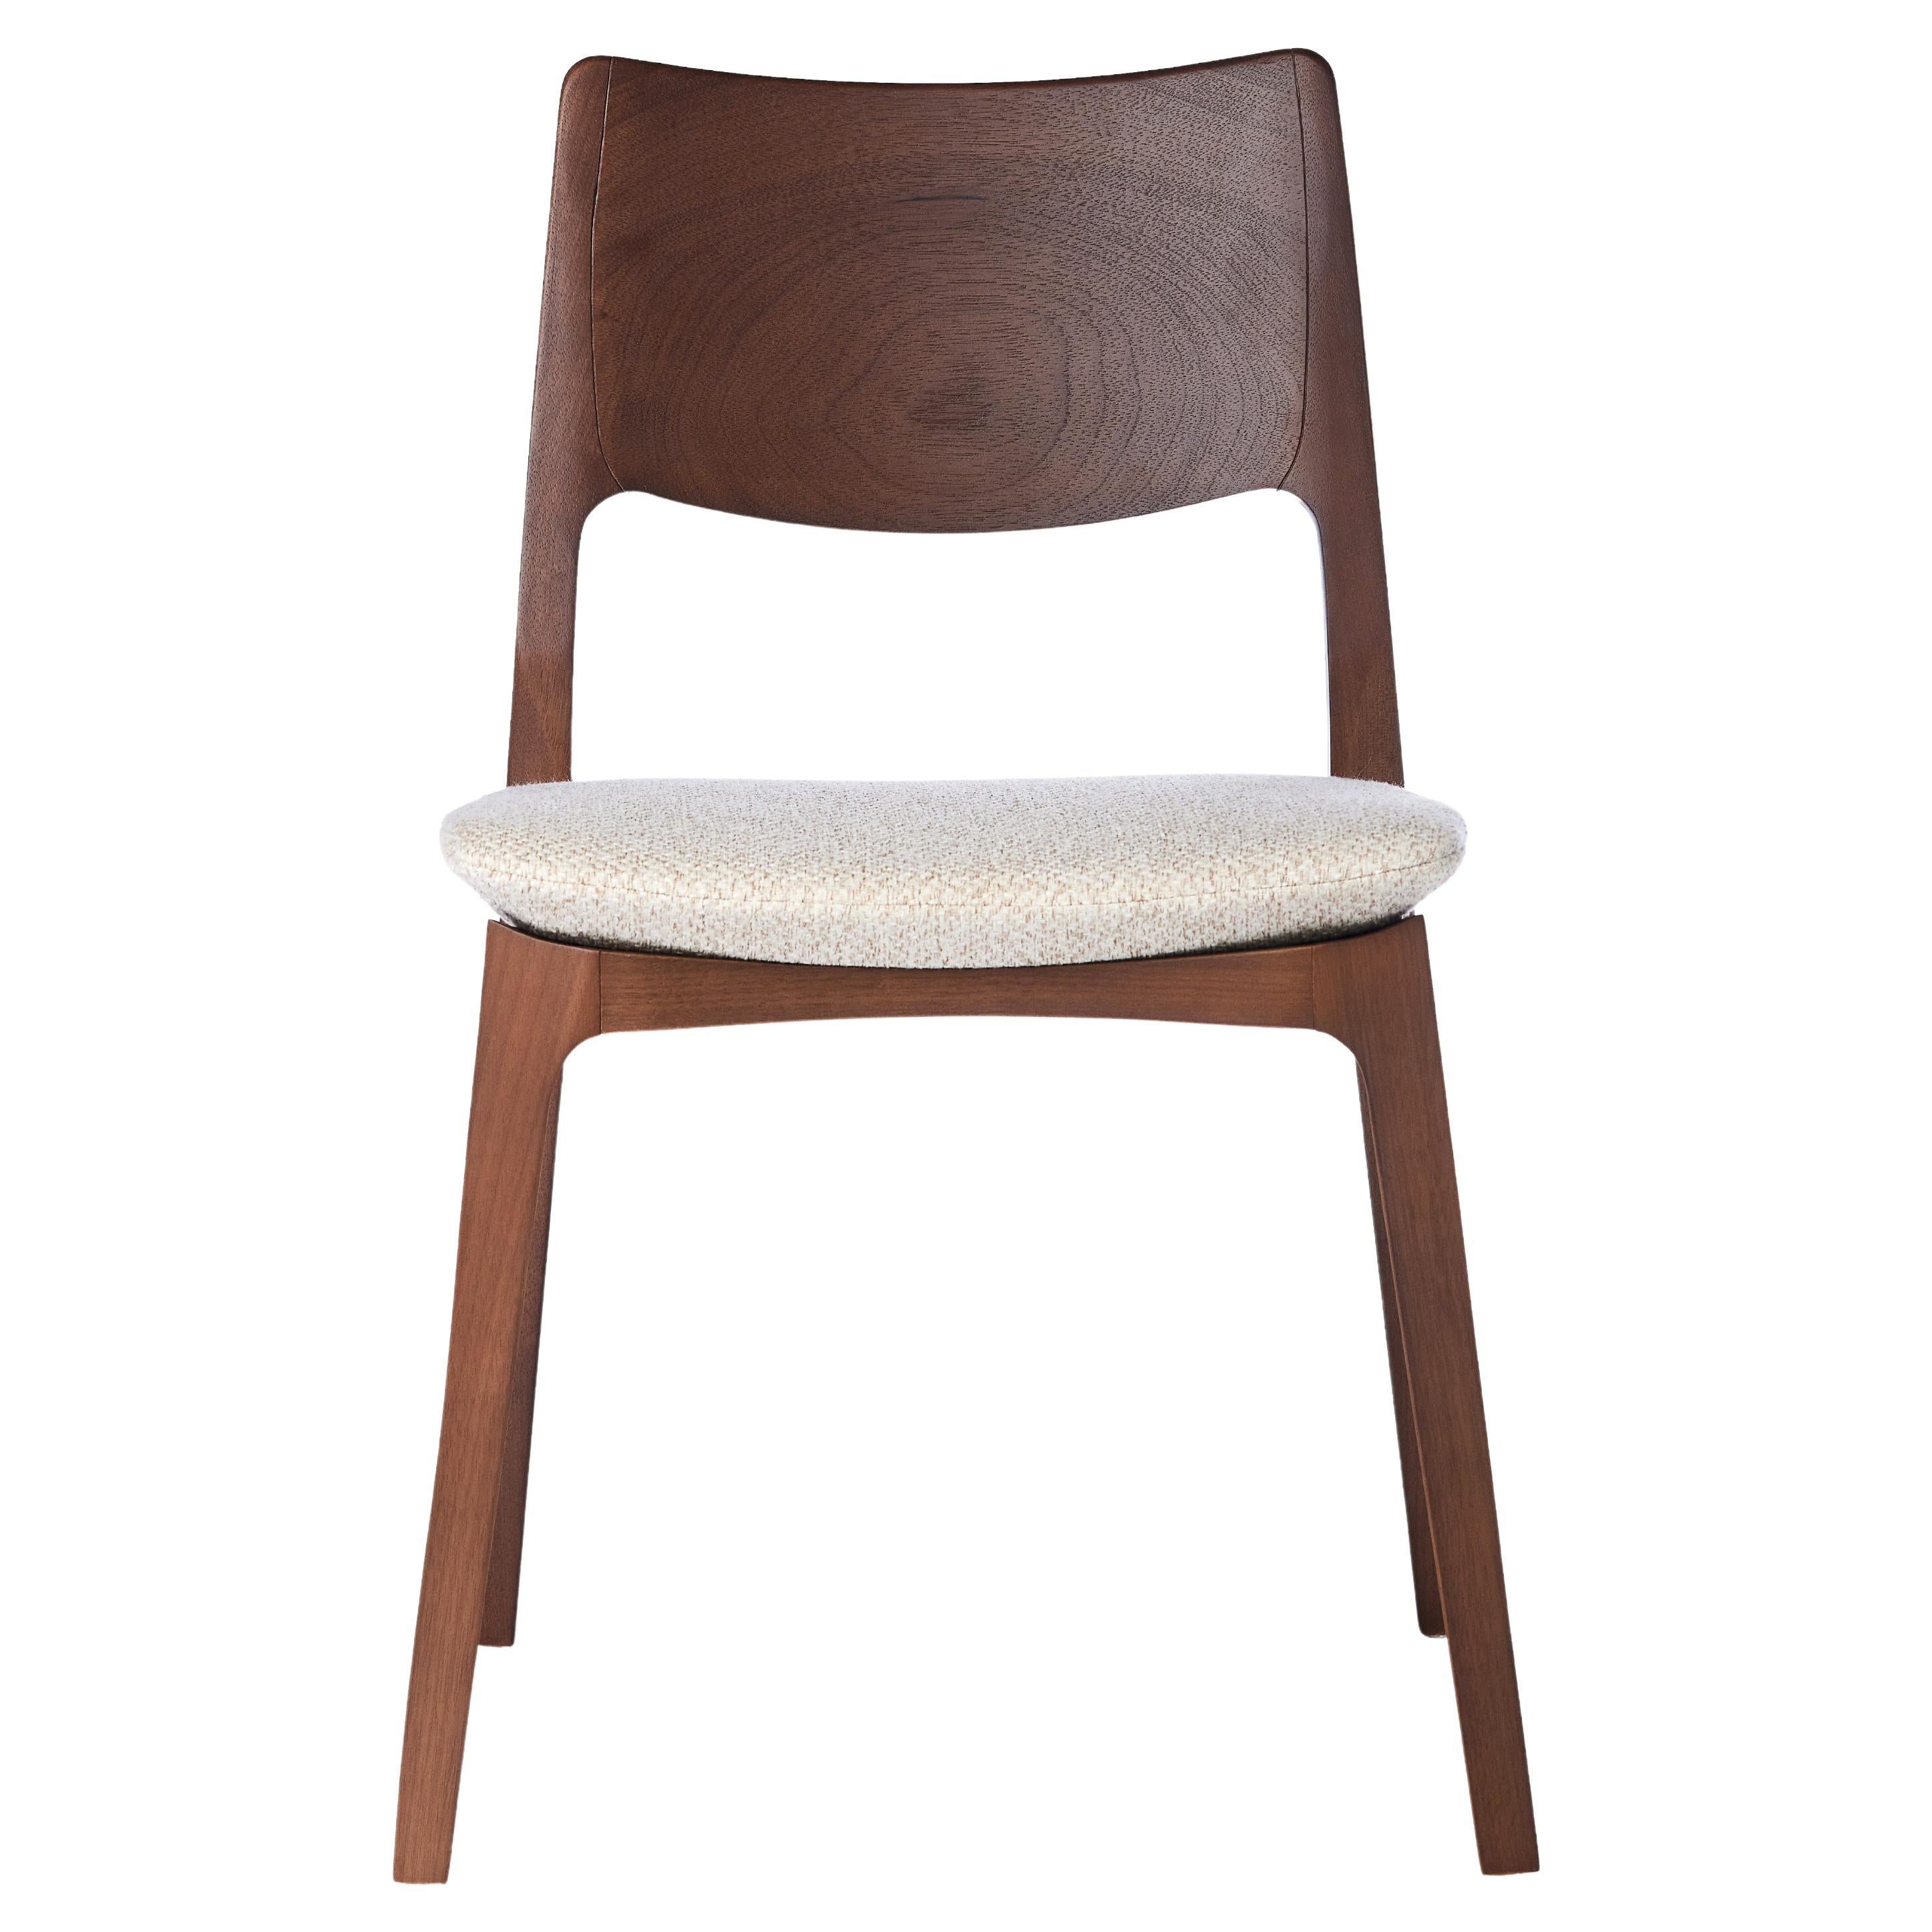 The Moderns Aurora Chair Sculptured in Walnut Finish No Arms, Upholstering Seat en vente